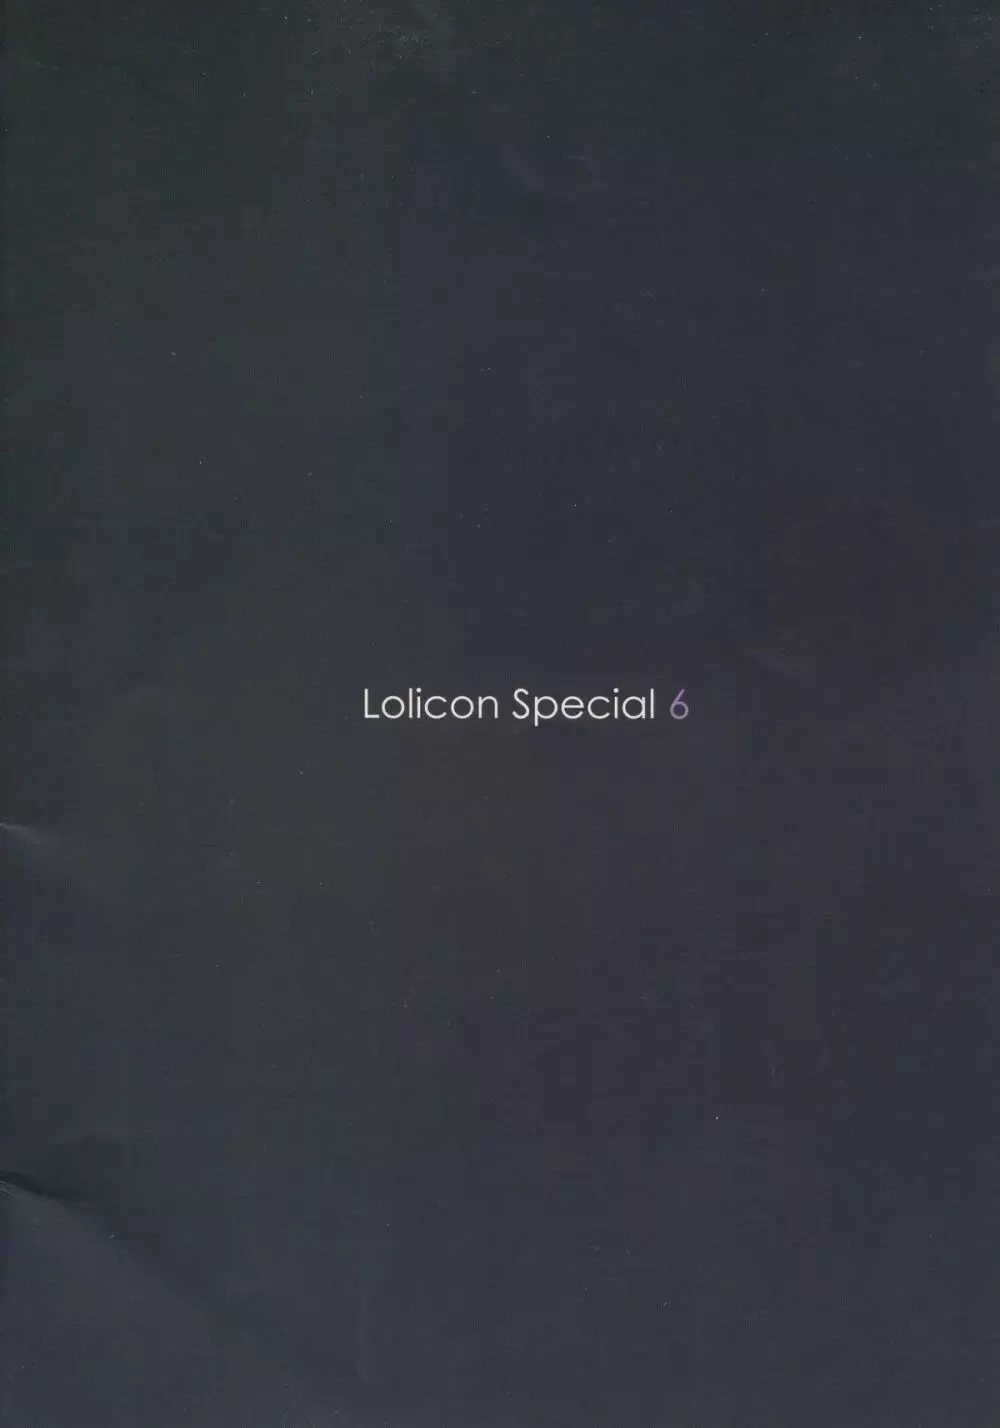 Lolicon Special 6 30ページ